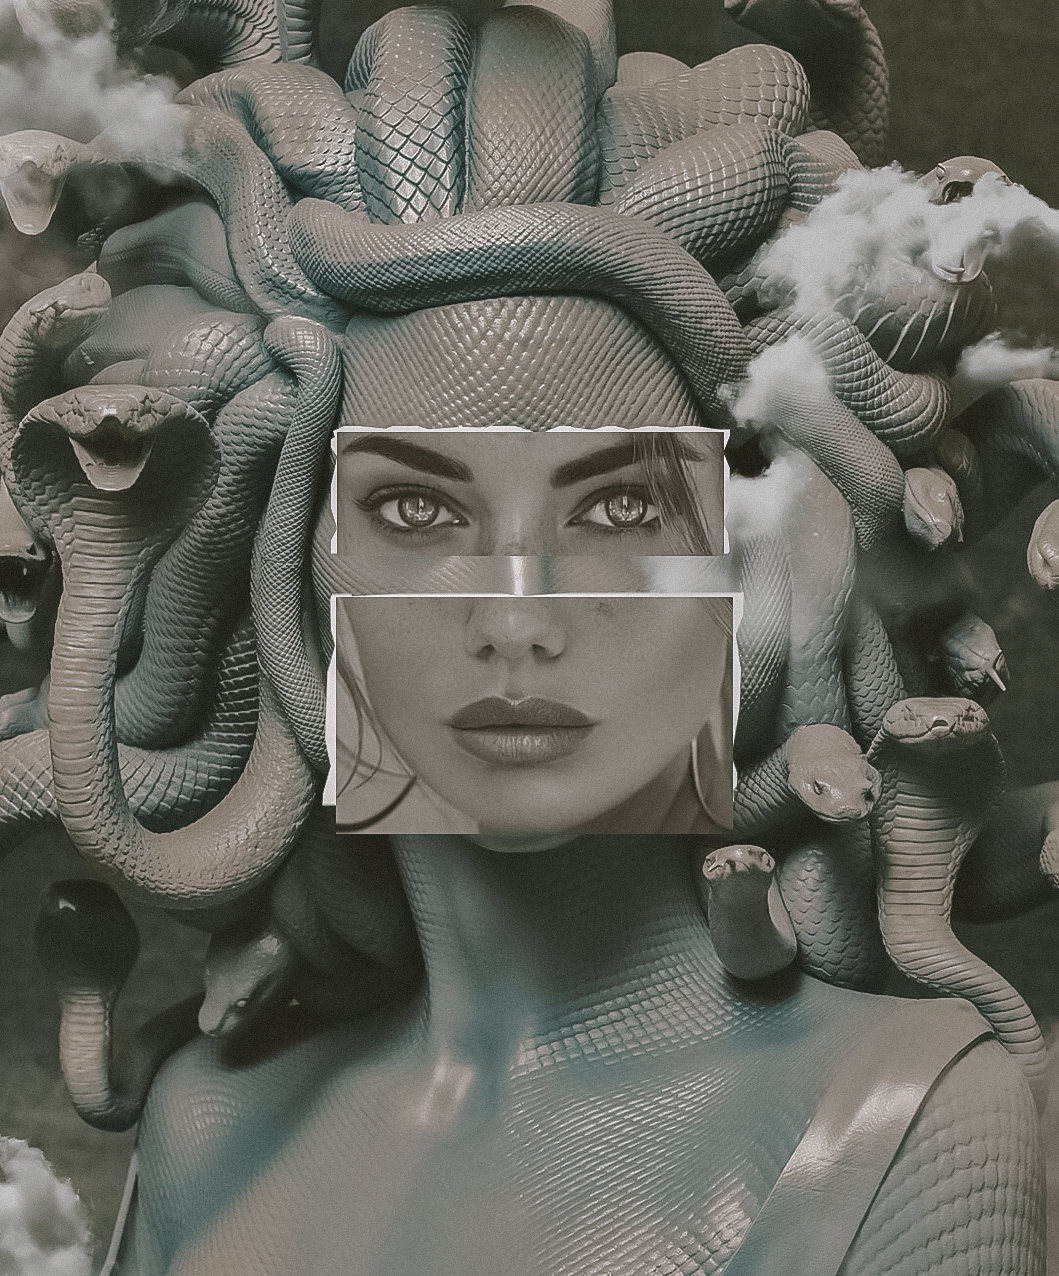 A woman with snakes on her head - Medusa